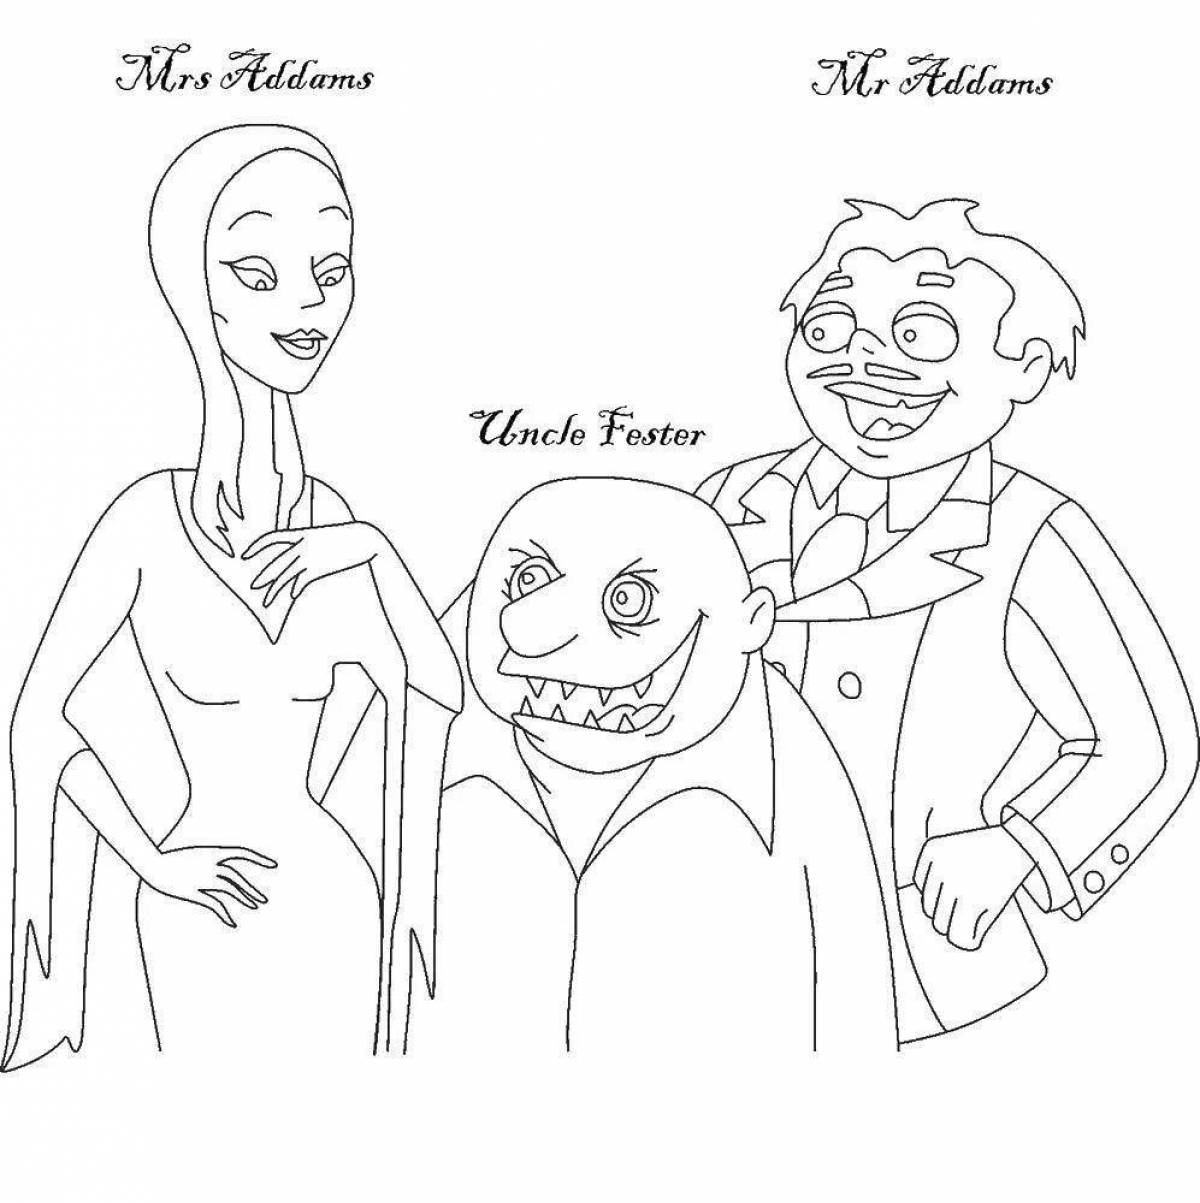 Awesome addams coloring page